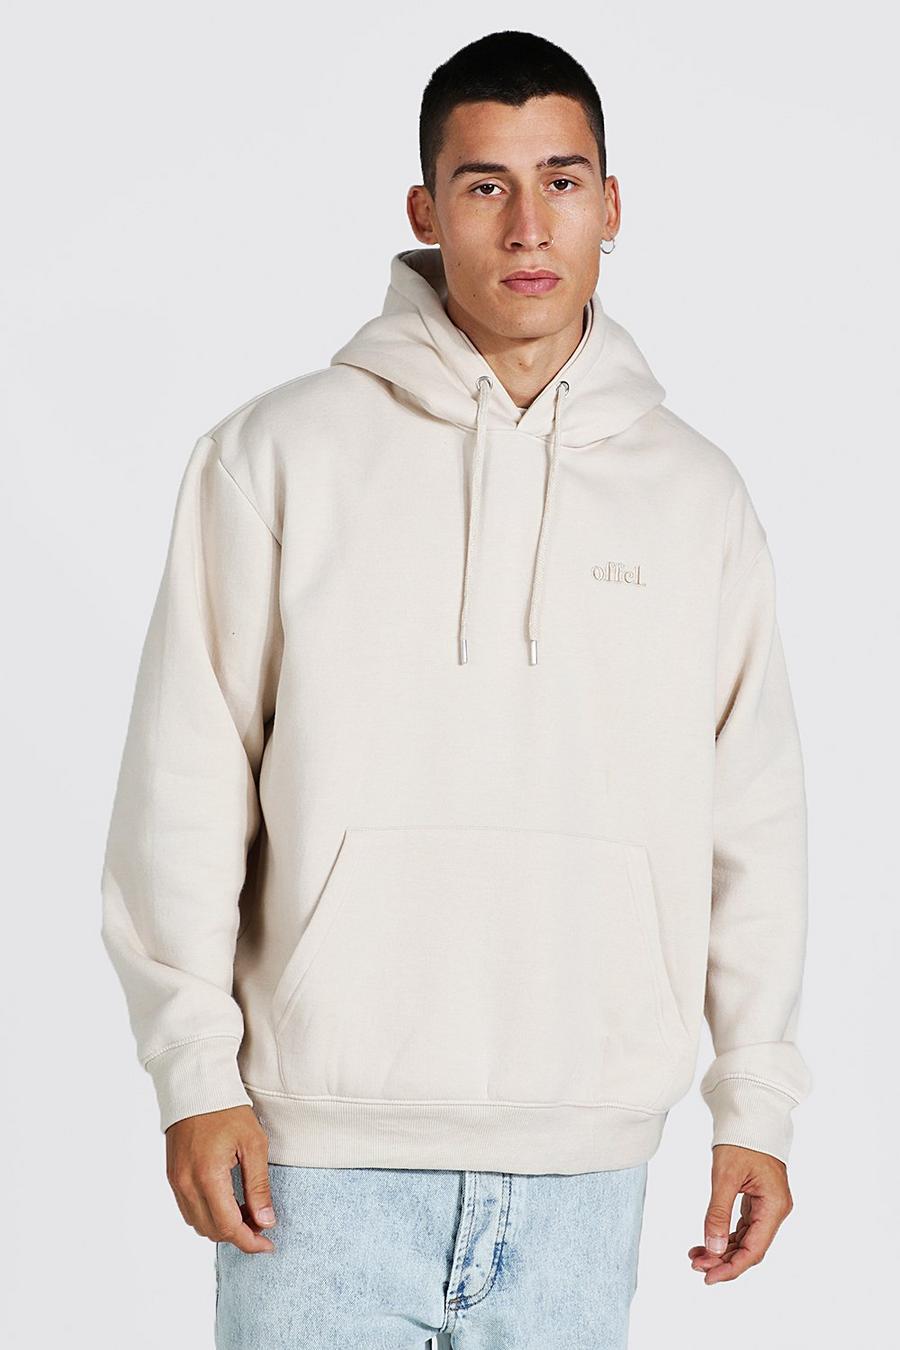 Pumice stone grey Offcl Oversized Over The Head Hoodie image number 1